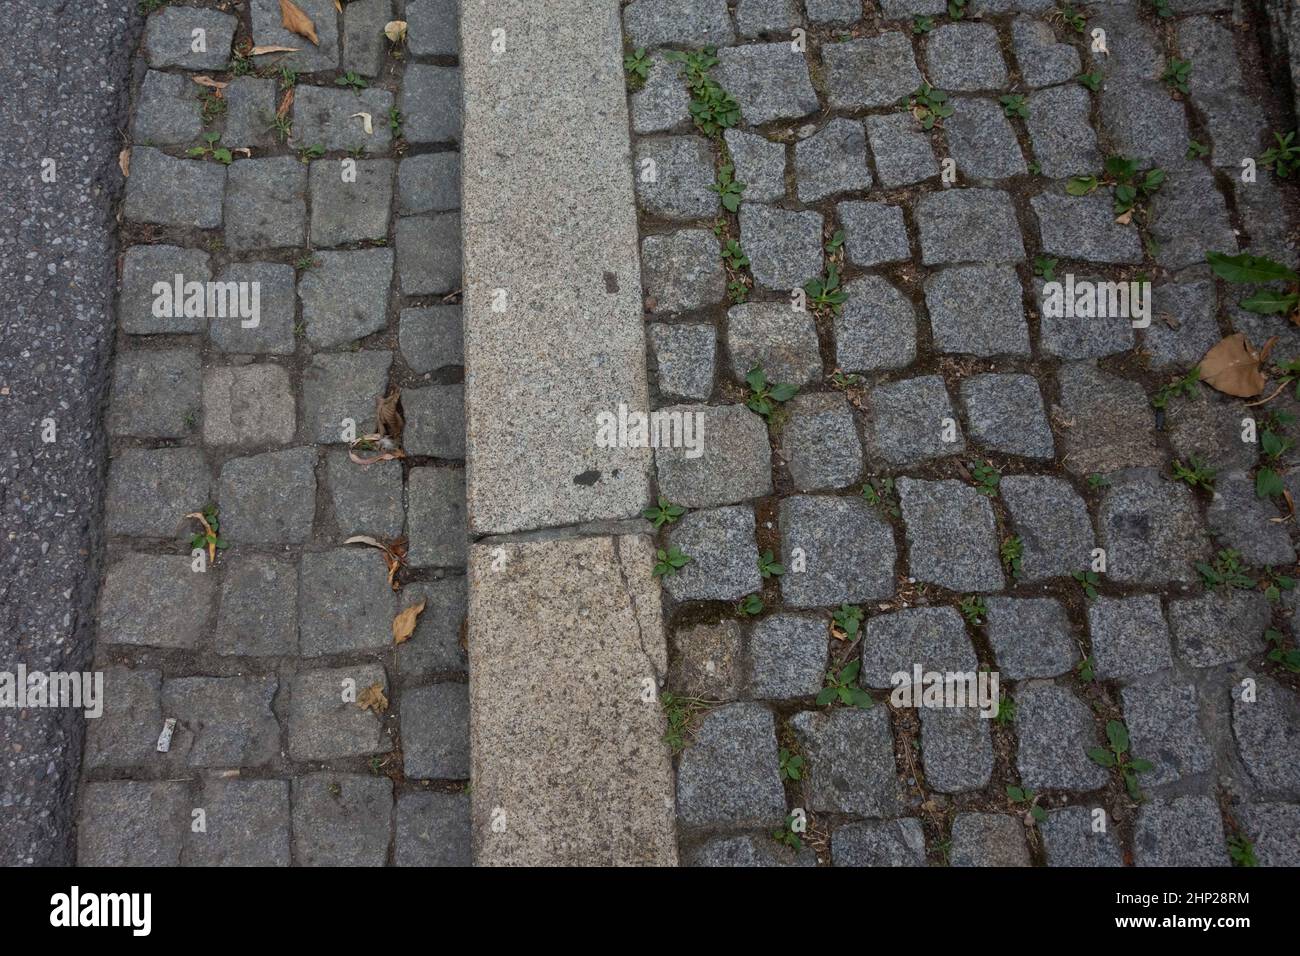 stone paving in road construction, public road network for mobility Stock Photo